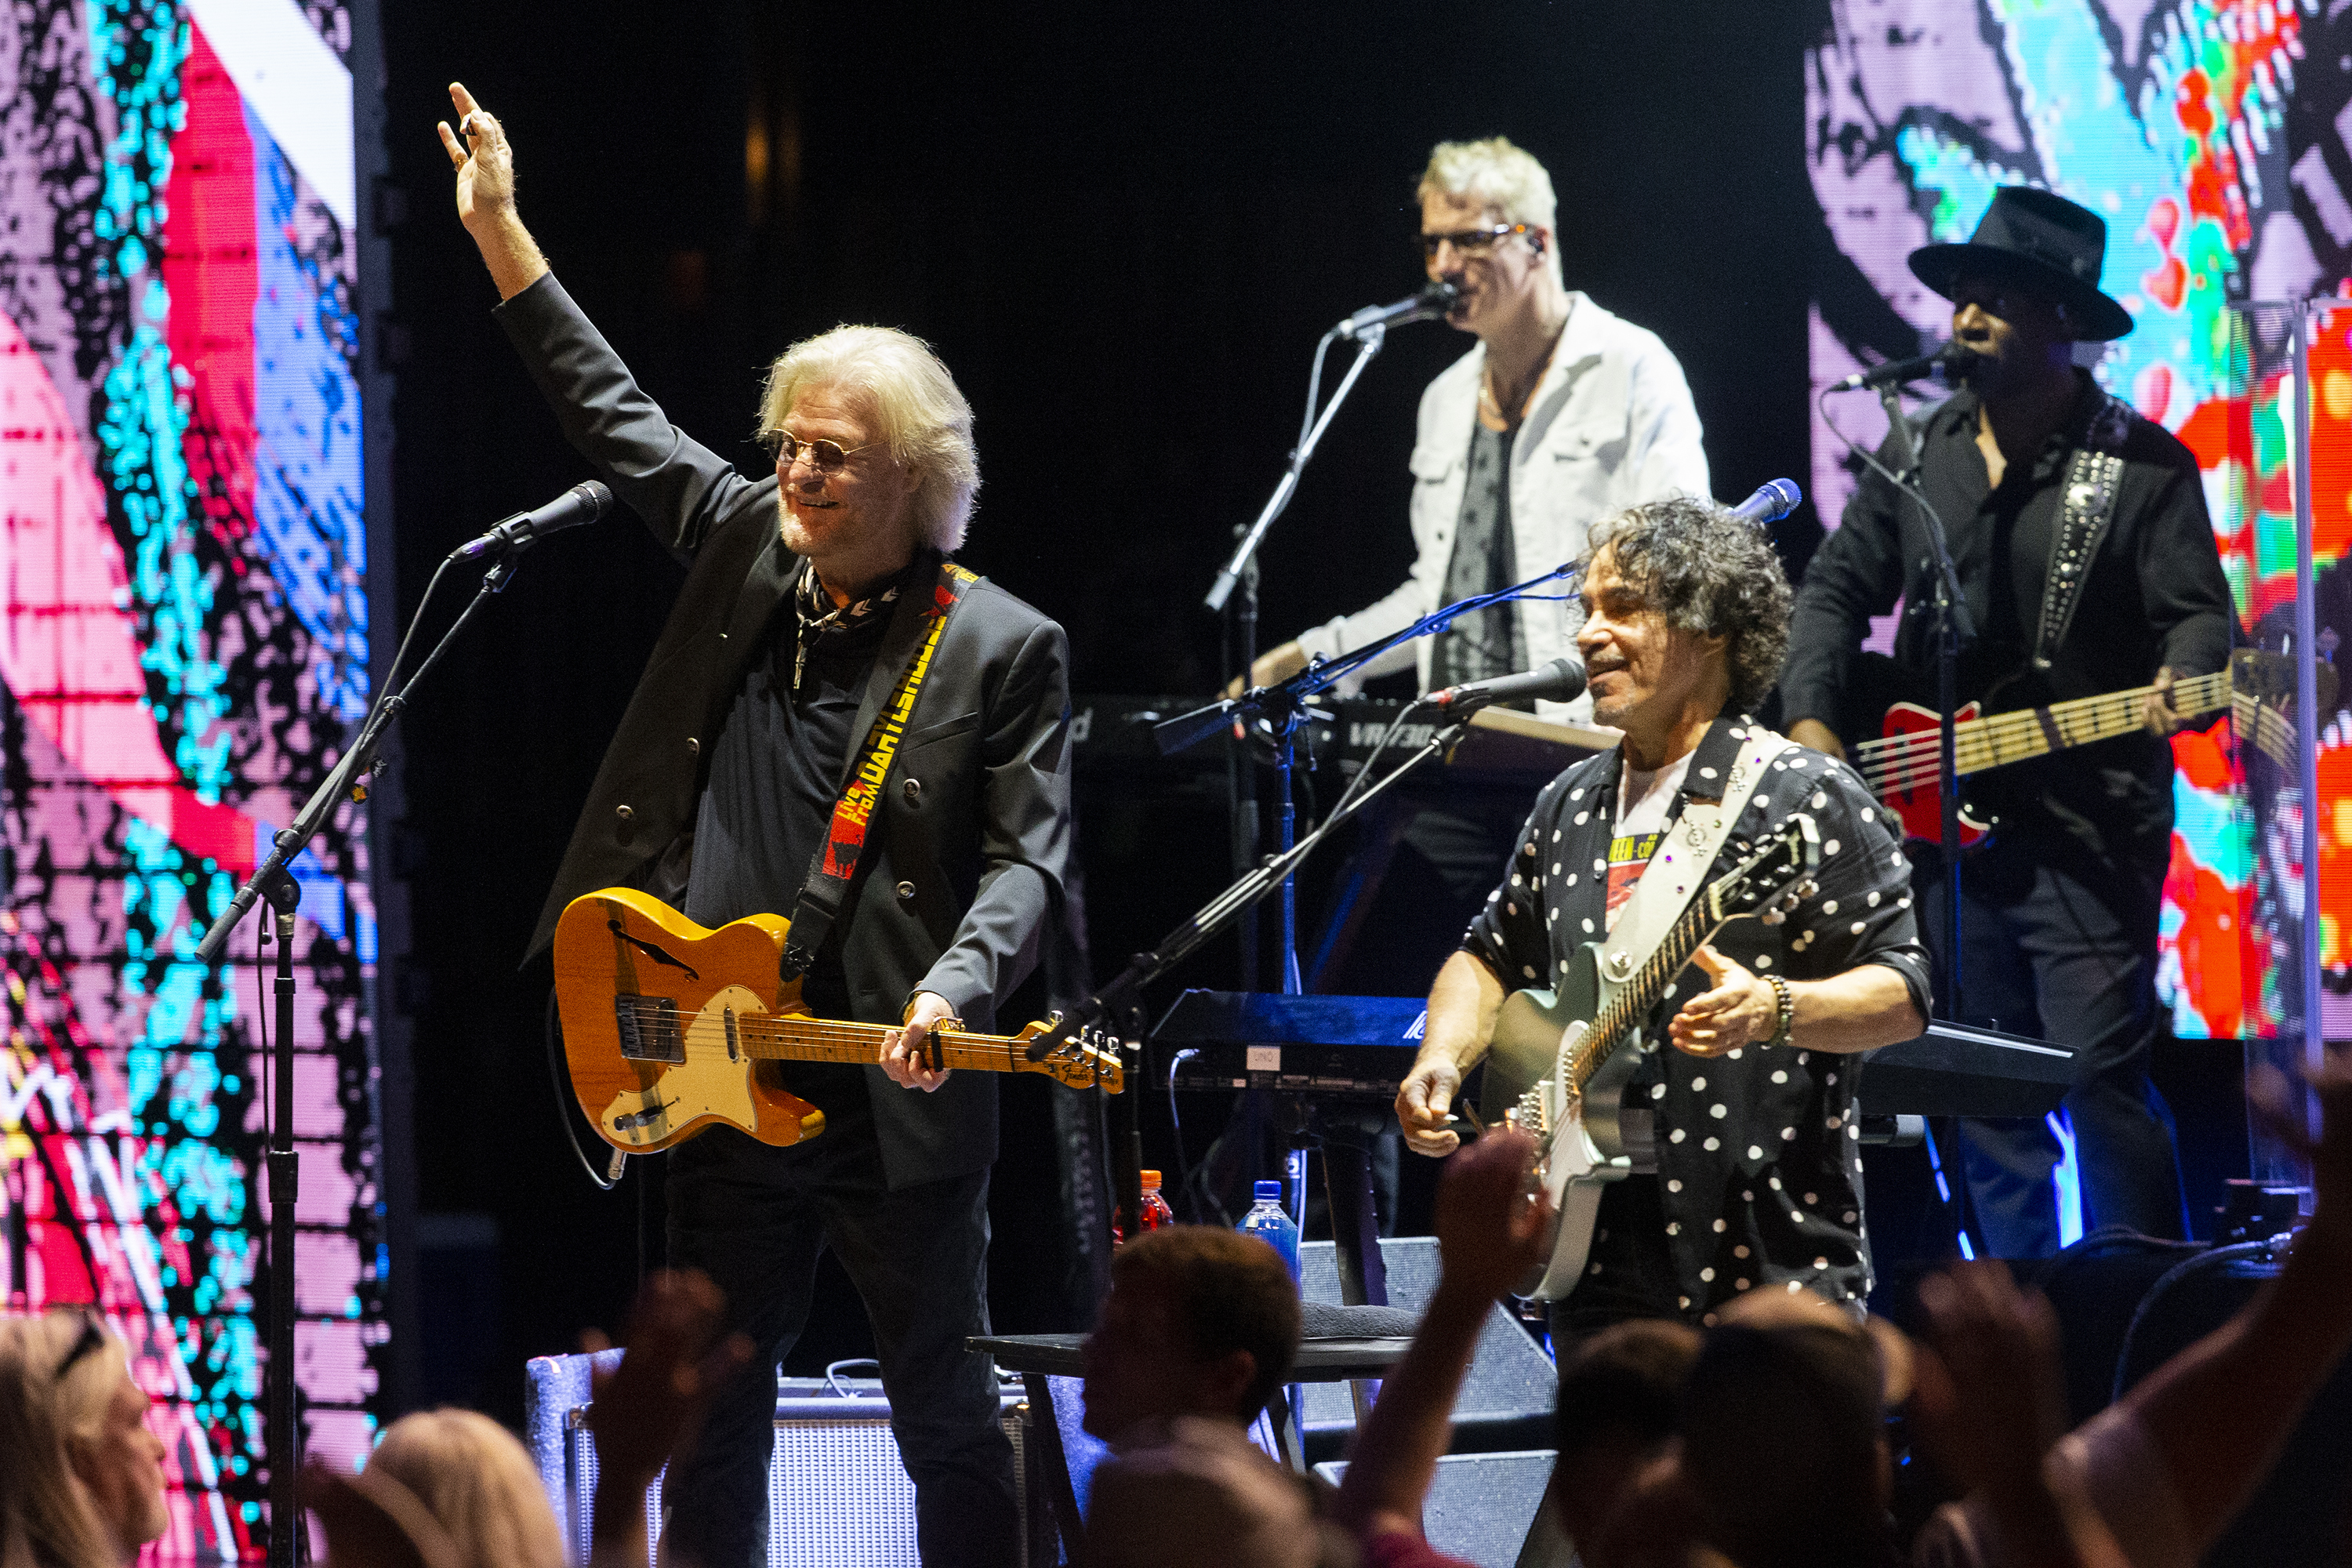 Review: Hall & Oates' HoagieNation in its first year at the Mann, with  Squeeze, Kool & the Gang and more